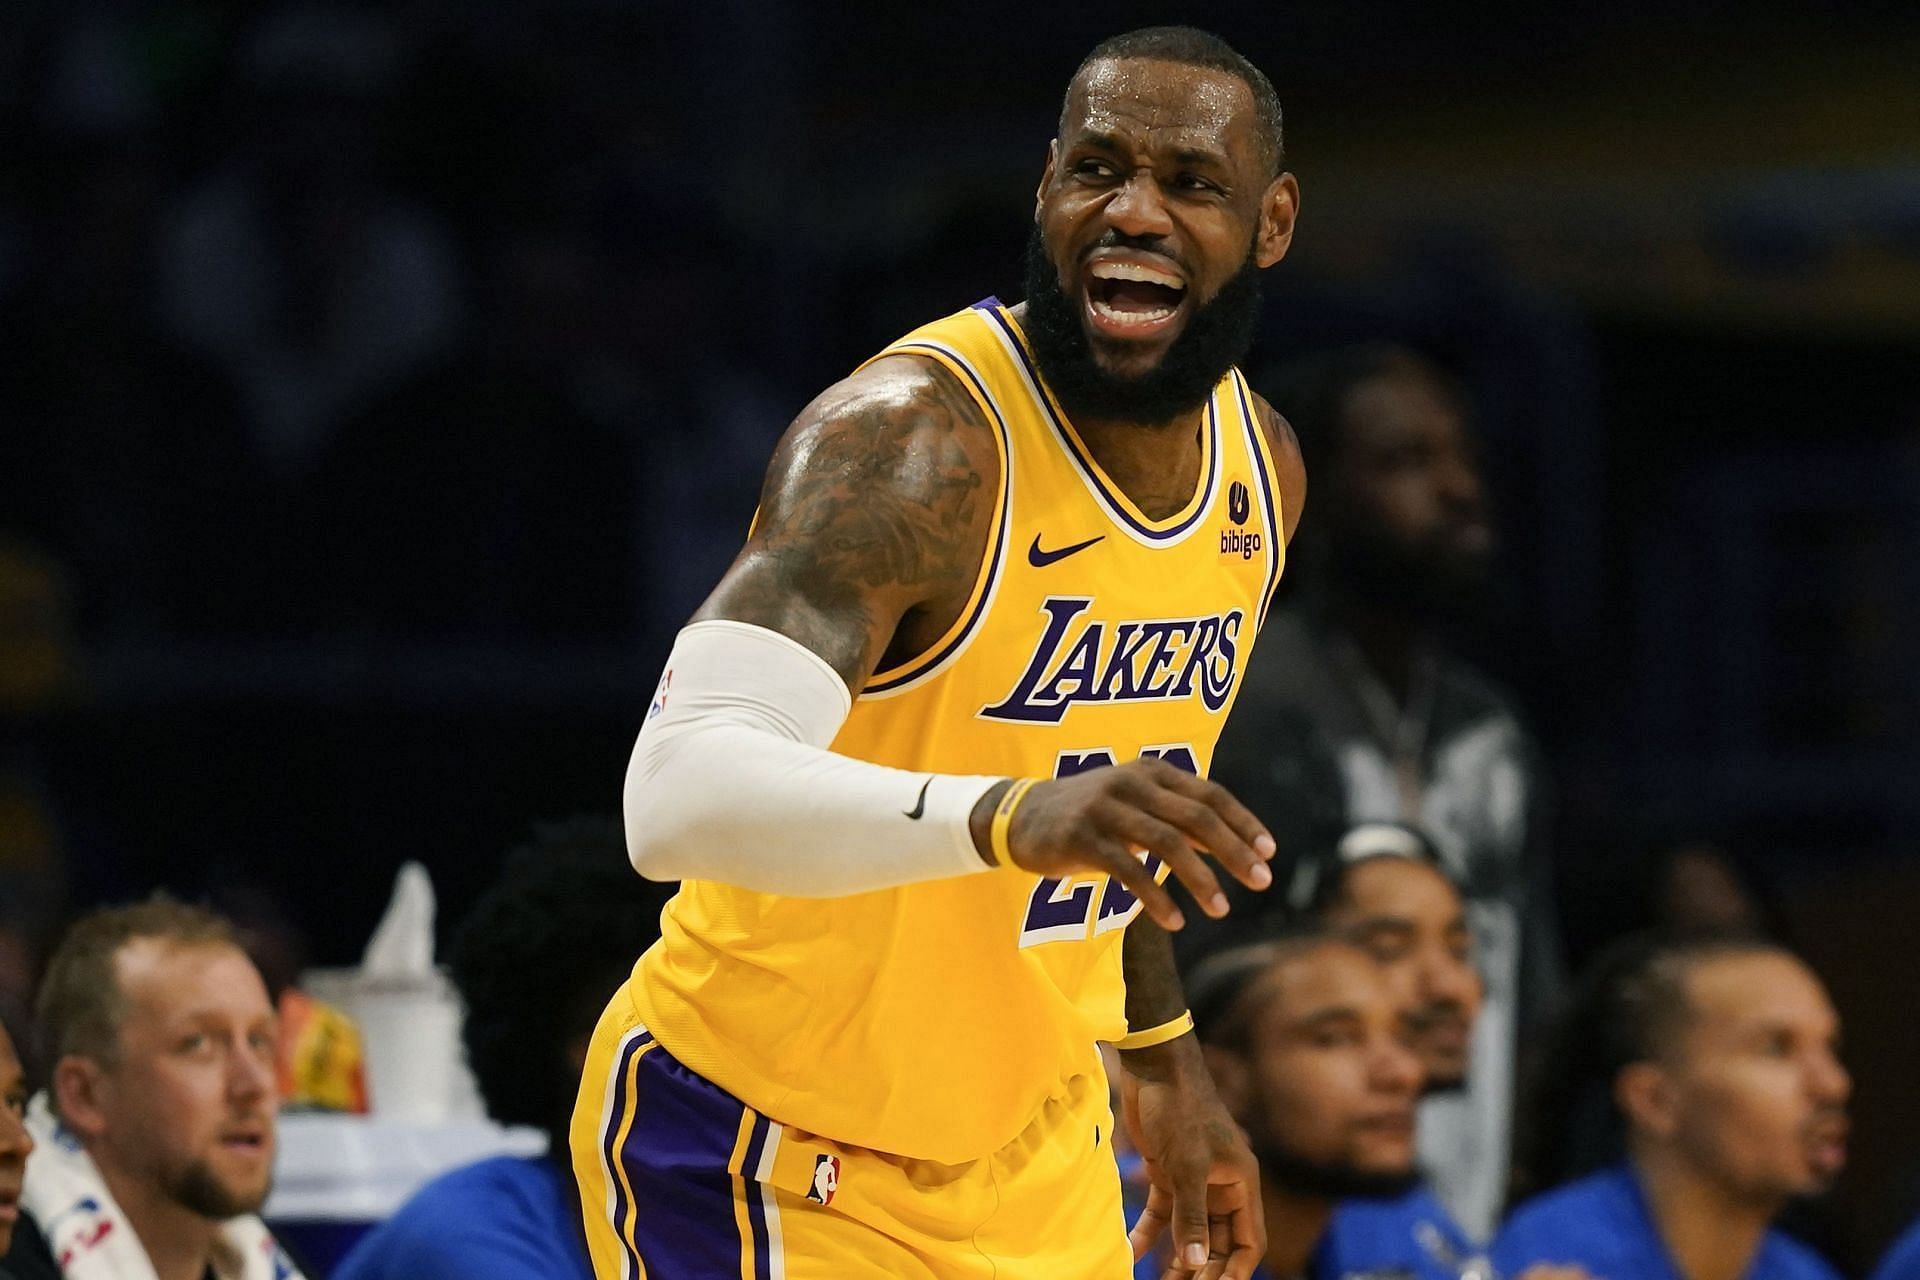  LeBron James loses it after seeing $8 billion revenue-generating video game